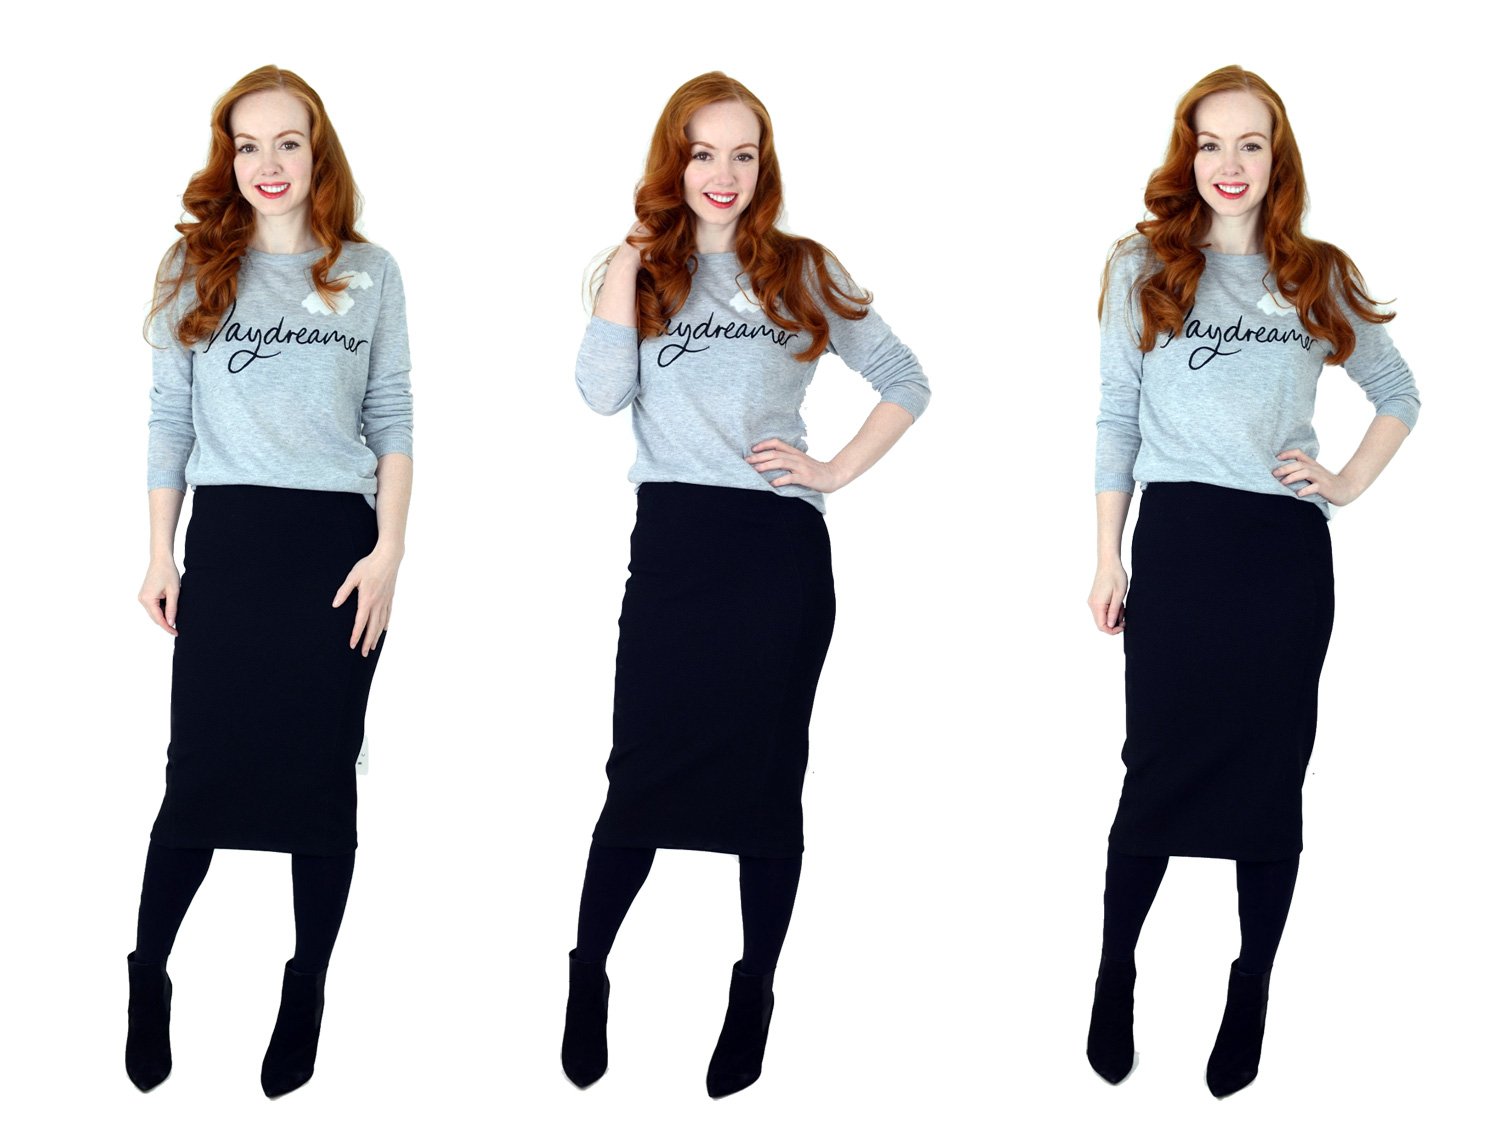 pencil skirt with slogan sweater